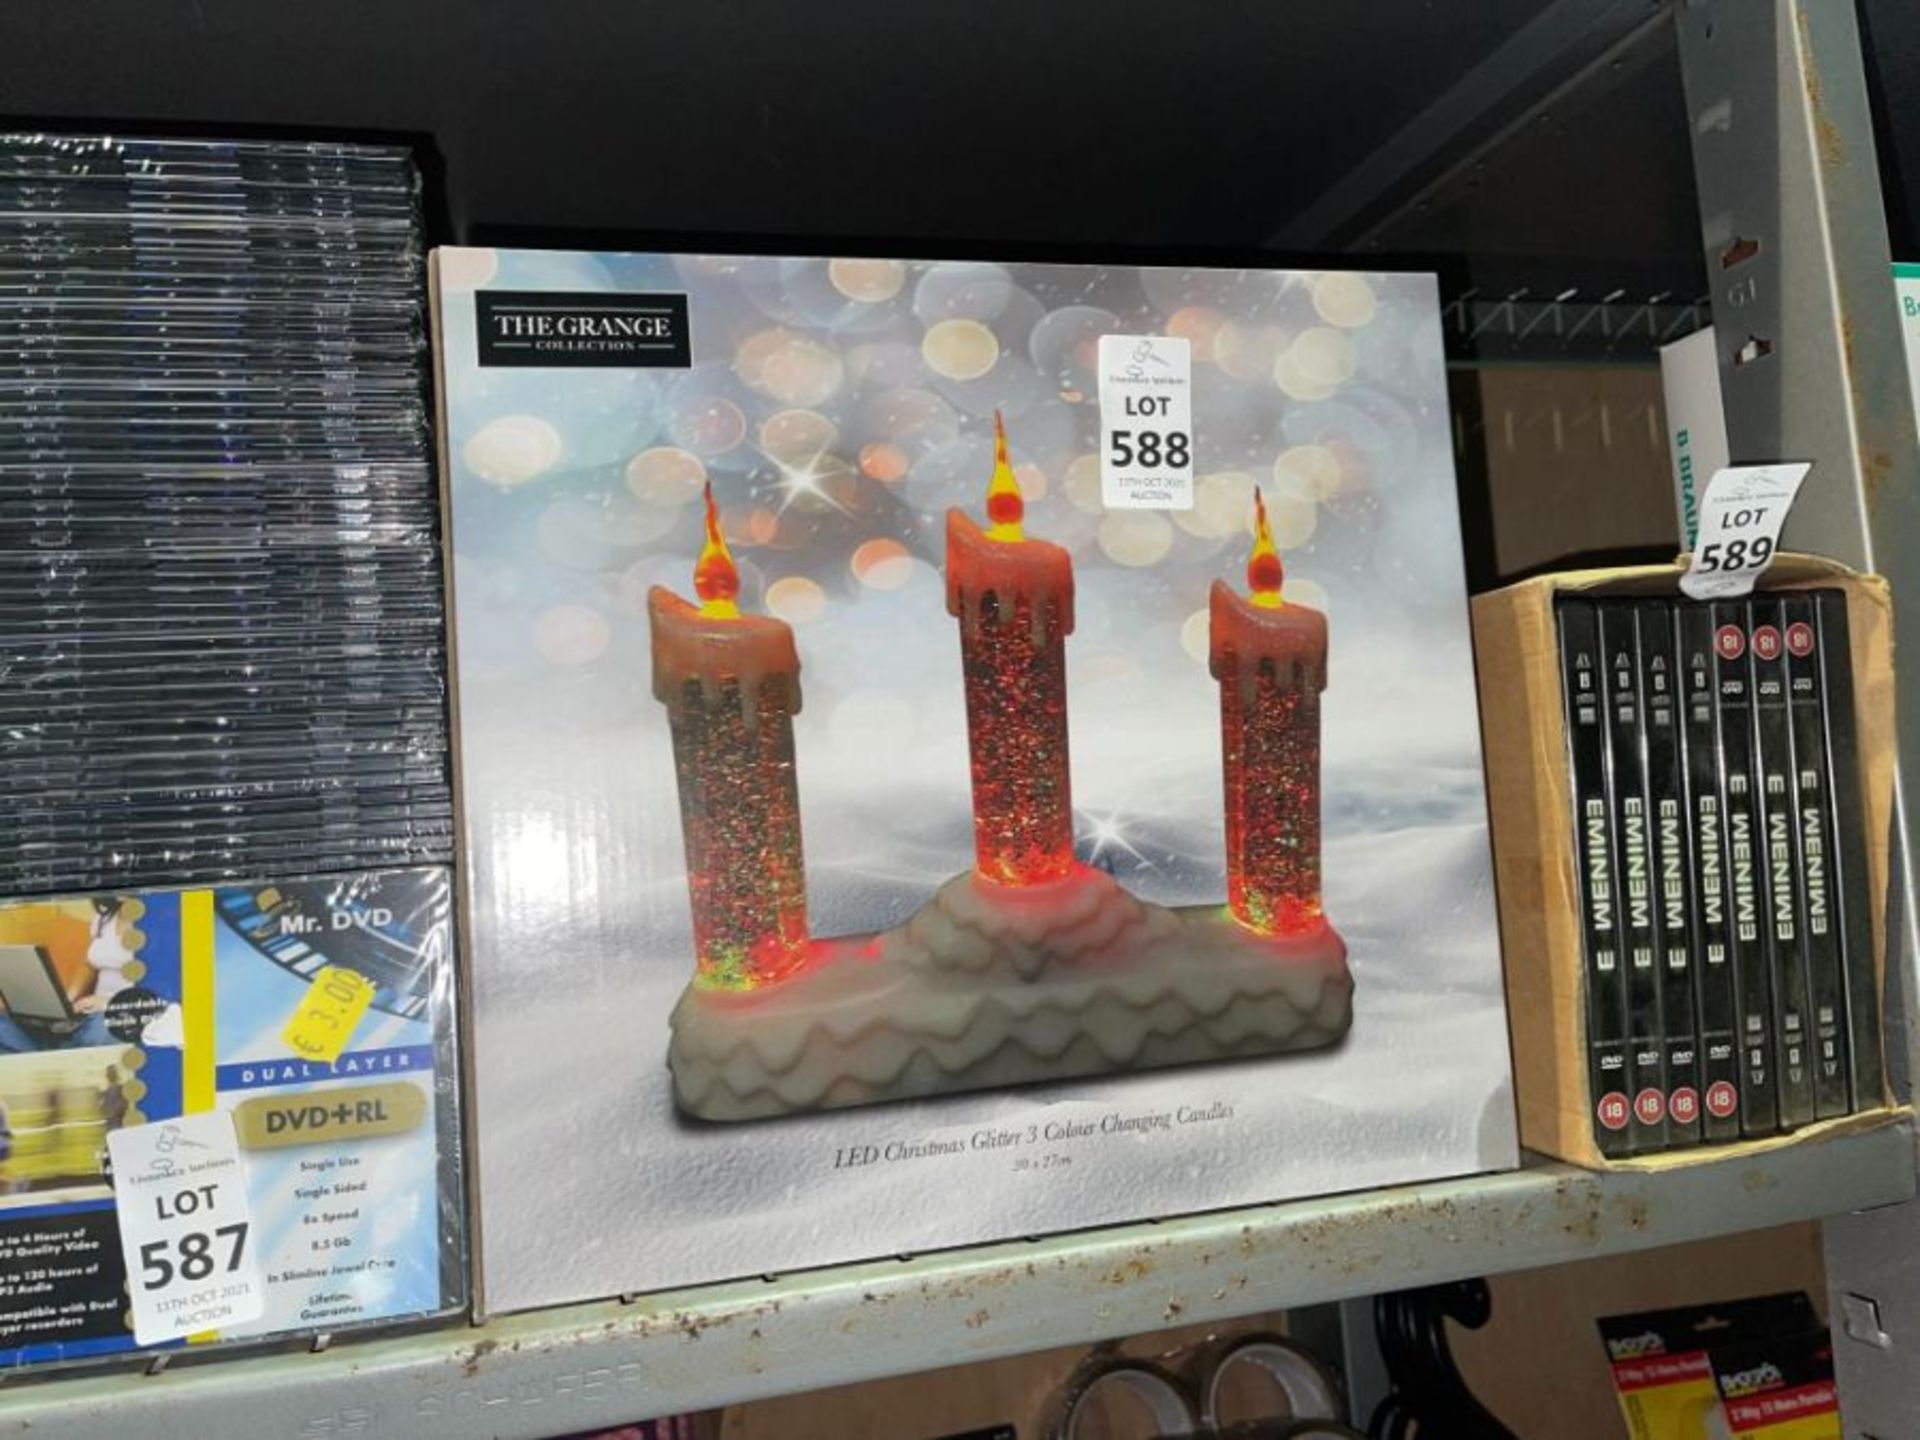 THE GRANGE COLLECTION LED CHRISTMAS COLOUR CHANGING CANDLES